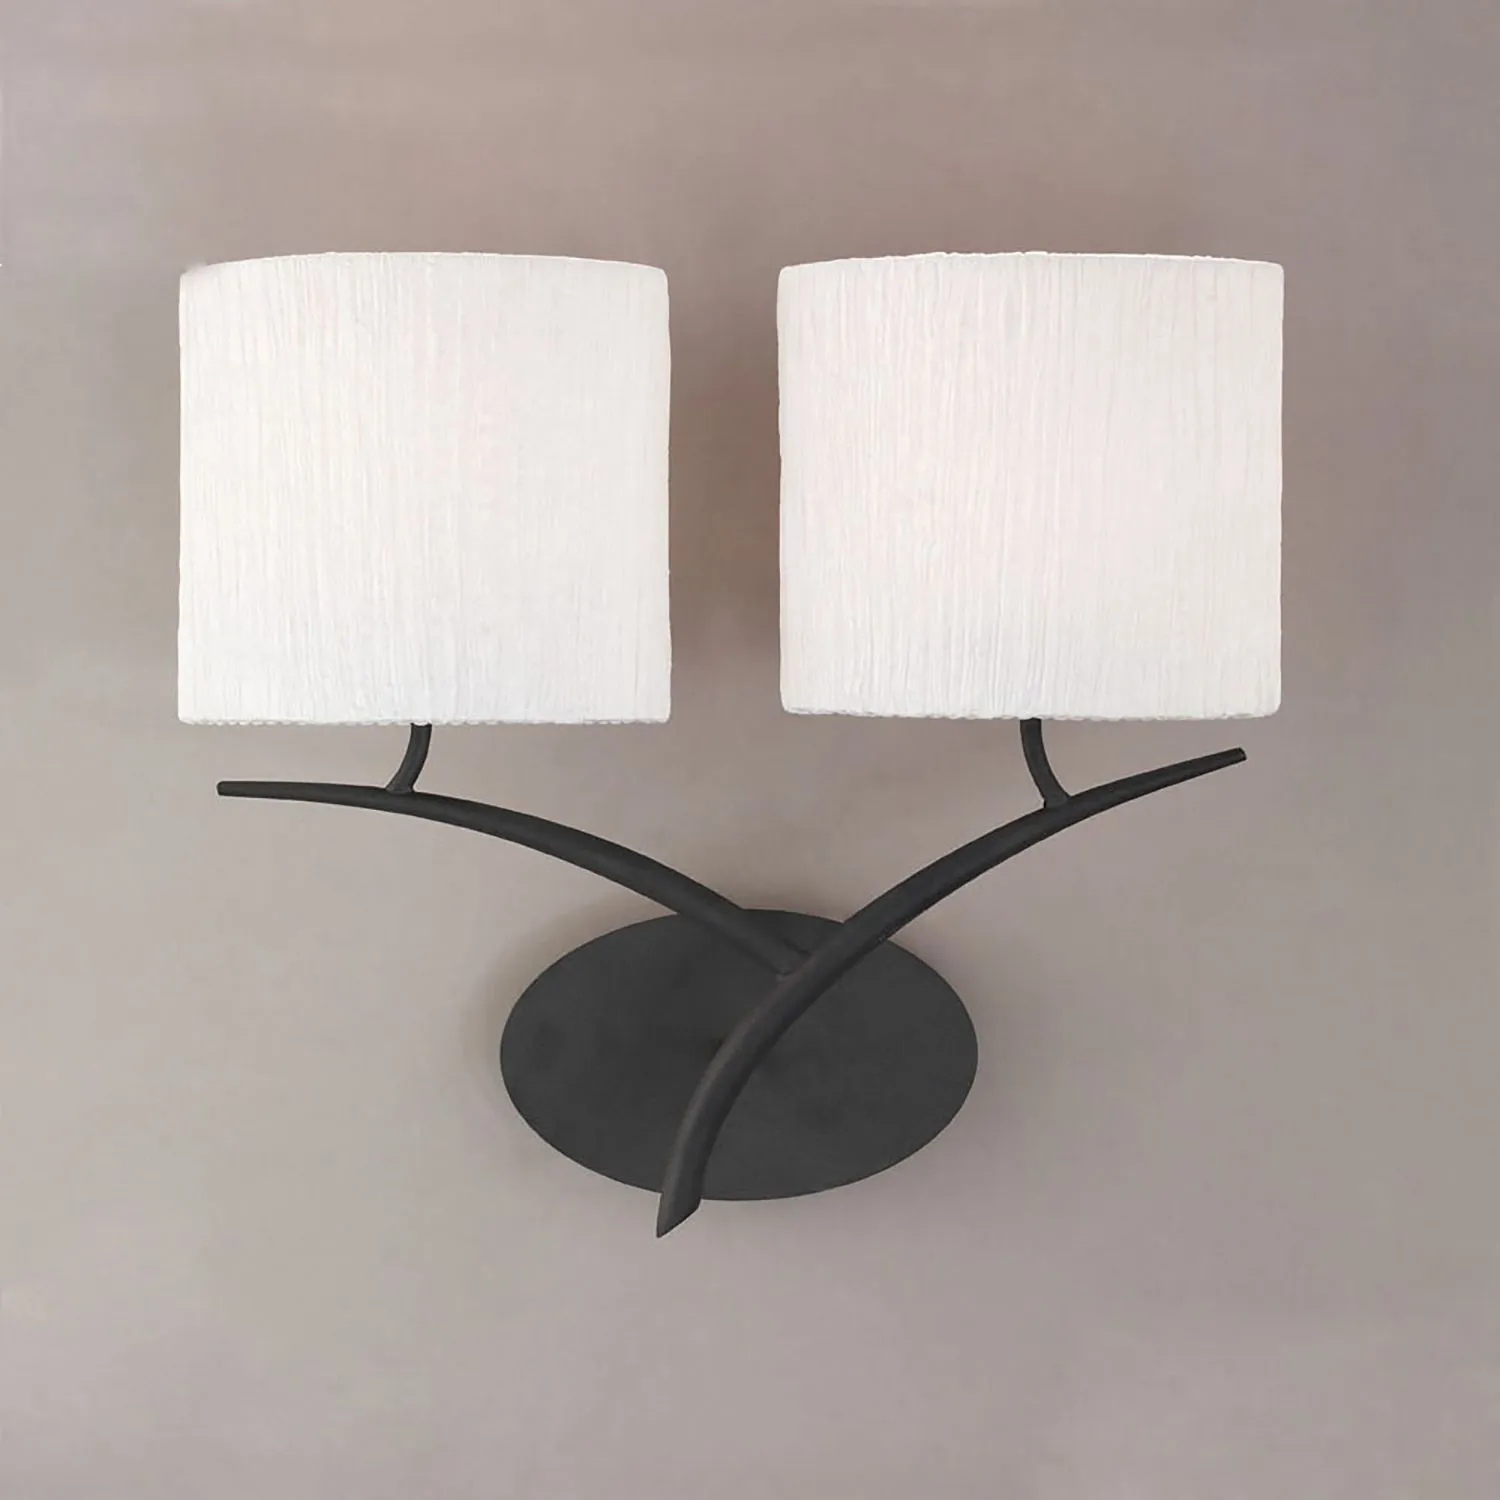 Eve Wall Lamp 2 Light E27, Anthracite With White Oval Shades